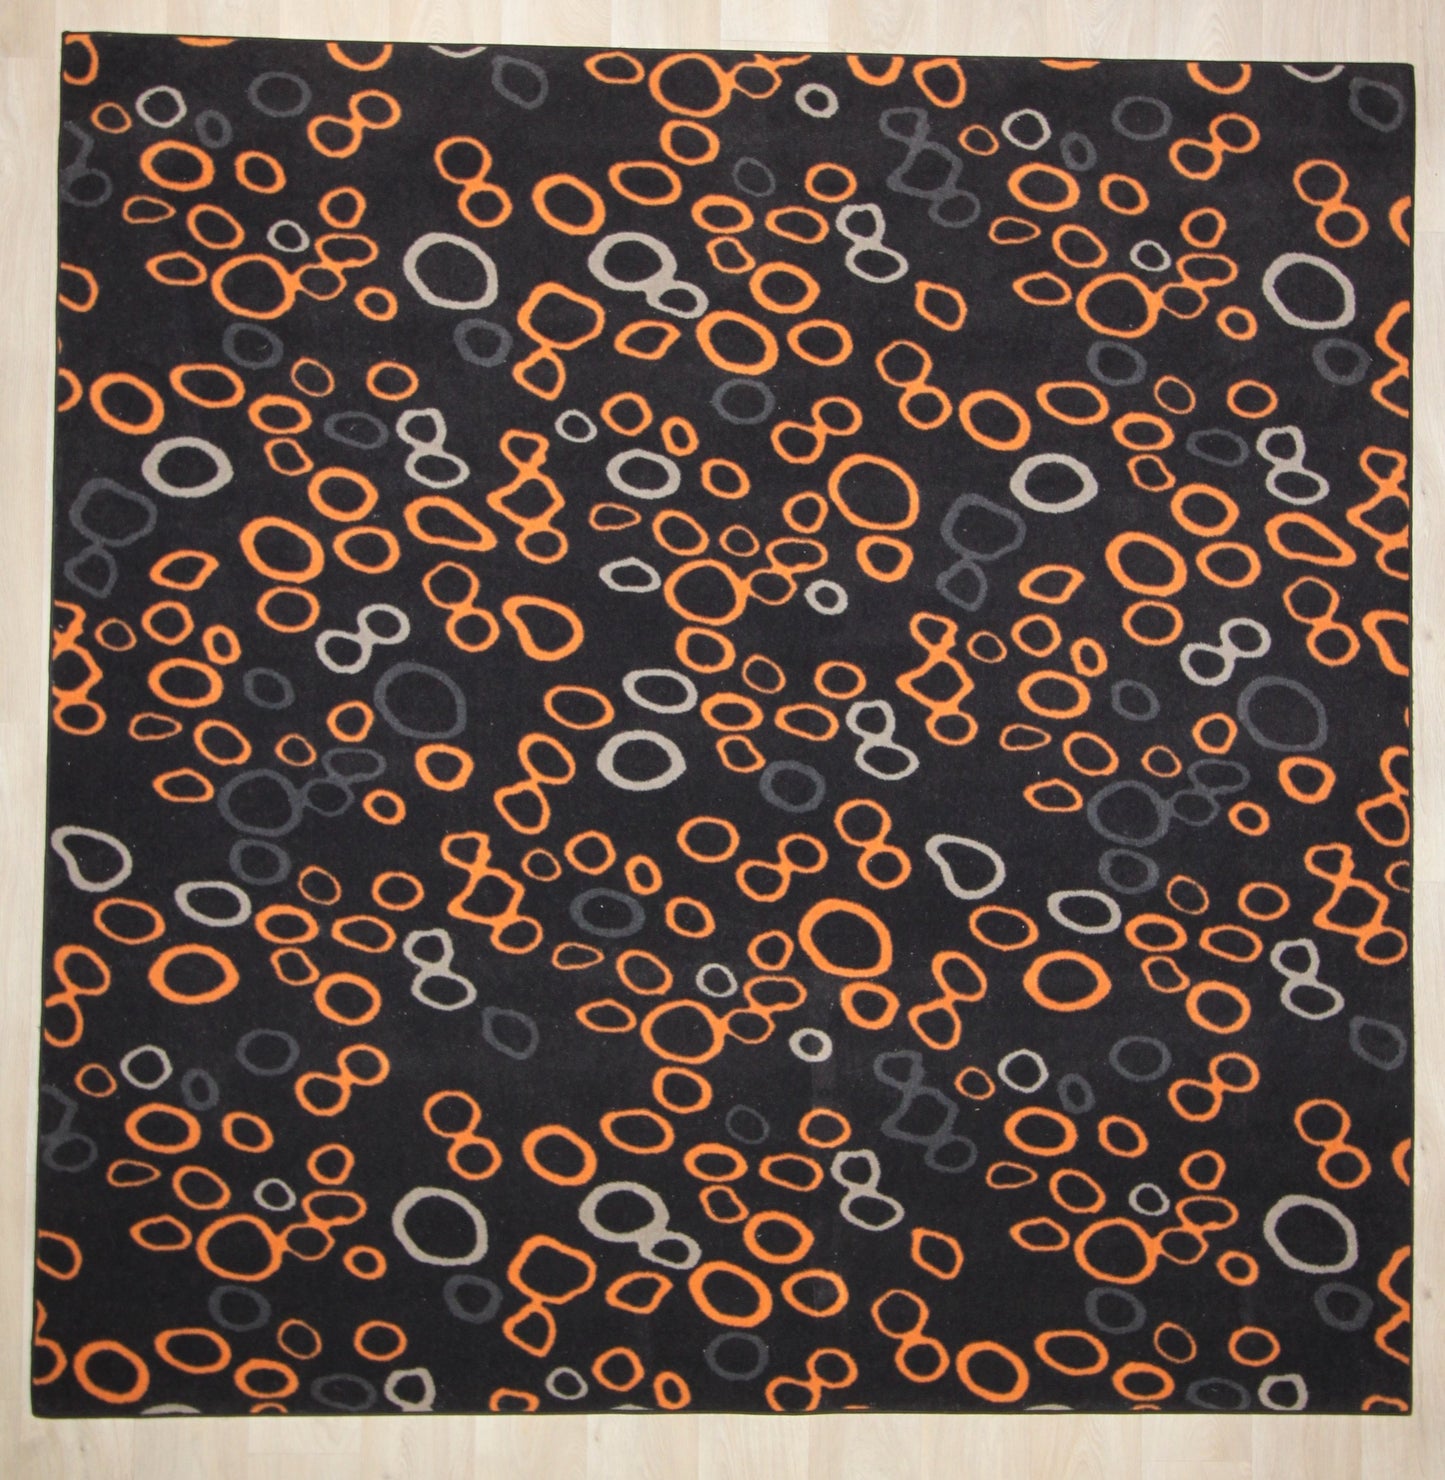 Square rug with round patterns